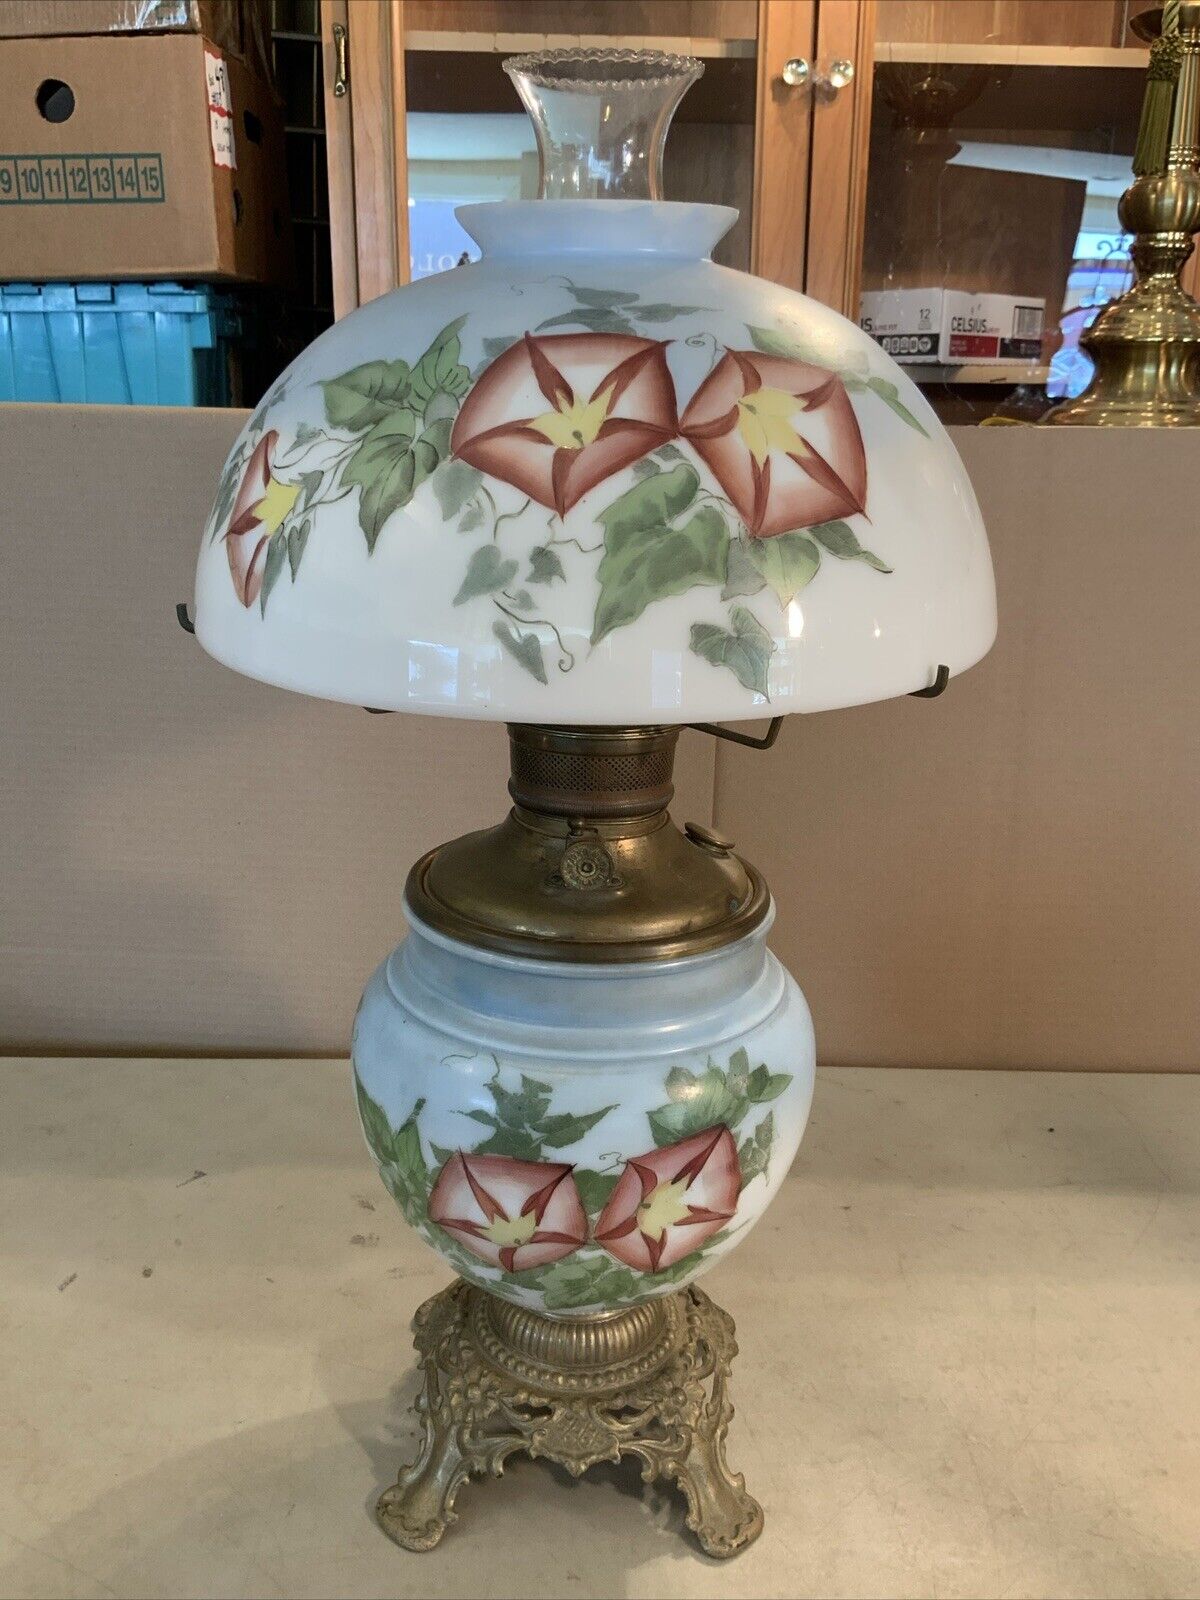 VINTAGE Antique 22” Oil TABLE LAMP GWTW BANQUET Parlor GLASS SHADE Hand Painted